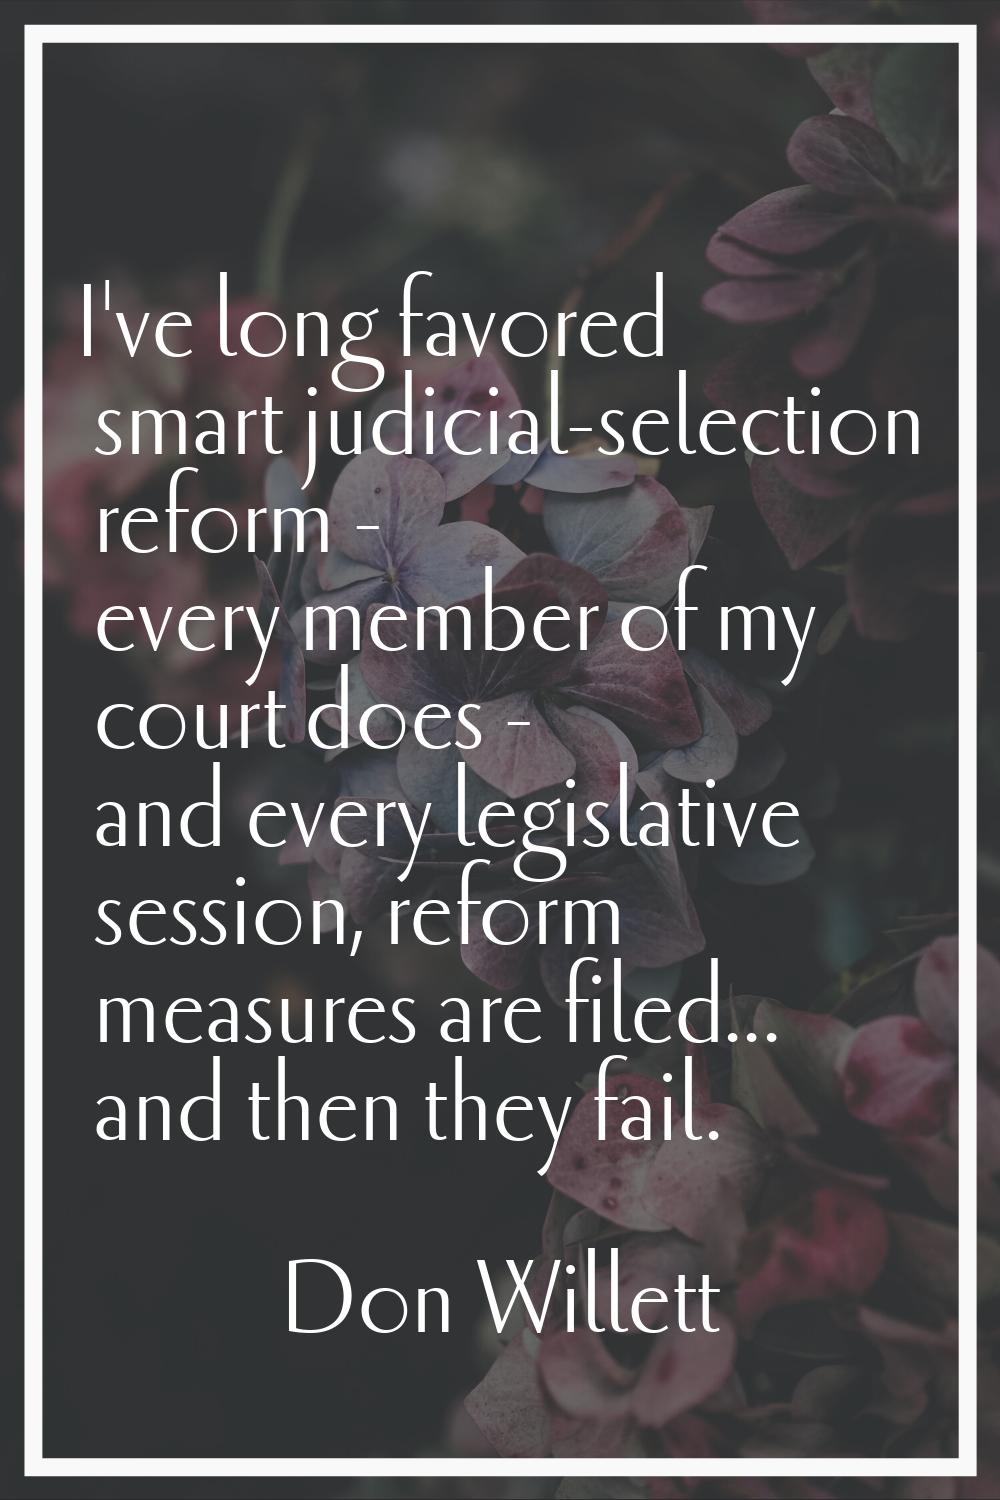 I've long favored smart judicial-selection reform - every member of my court does - and every legis